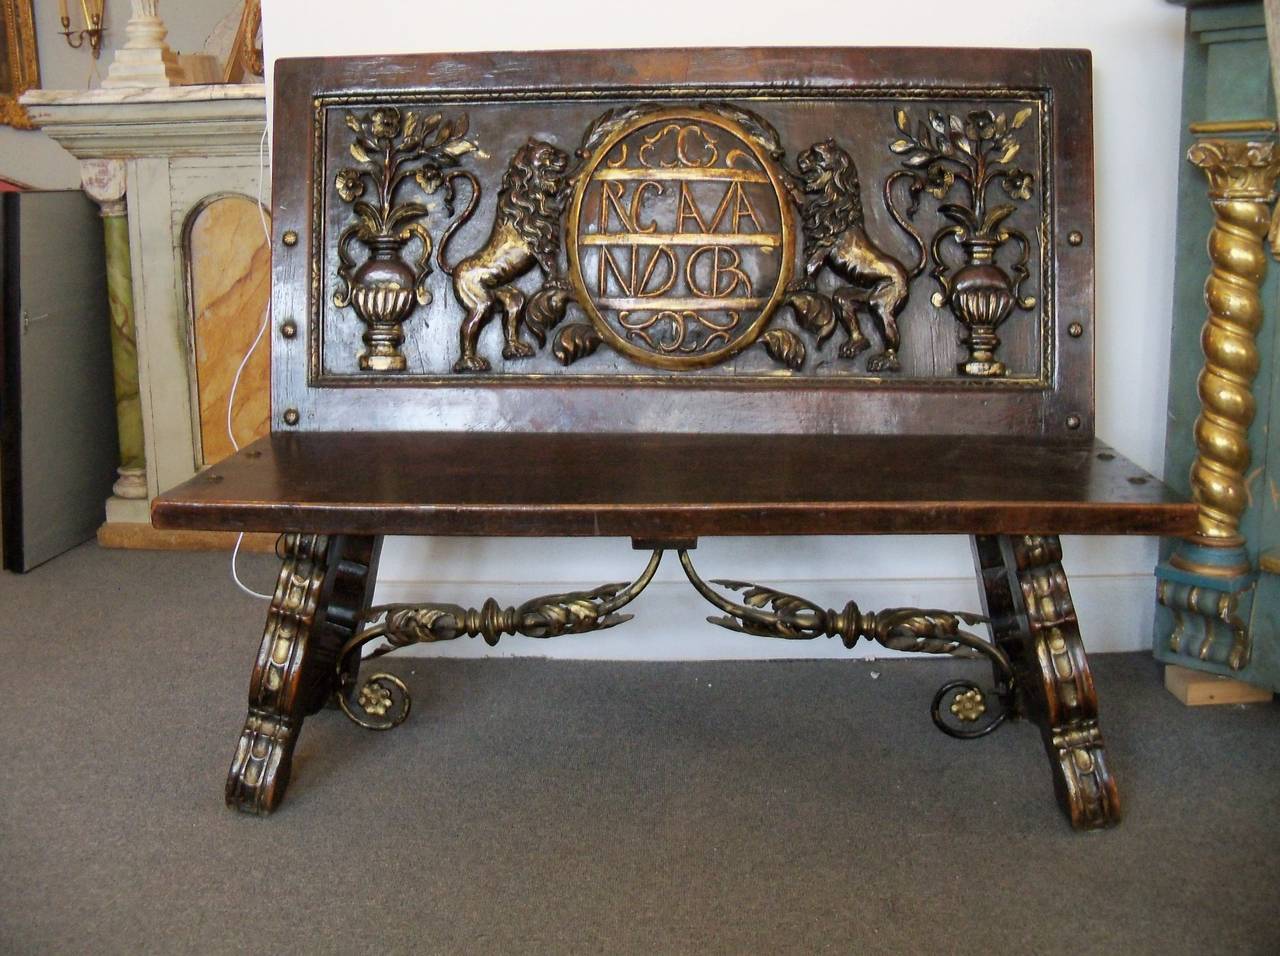 Highly decorative carved stained walnut  bench with gilt accents;  Italy 19thc.  A gilded iron stretcher adorned with gilded iron leaves supports the seat and legs;  further support is provided by an iron angle brace bolted to the back and underside